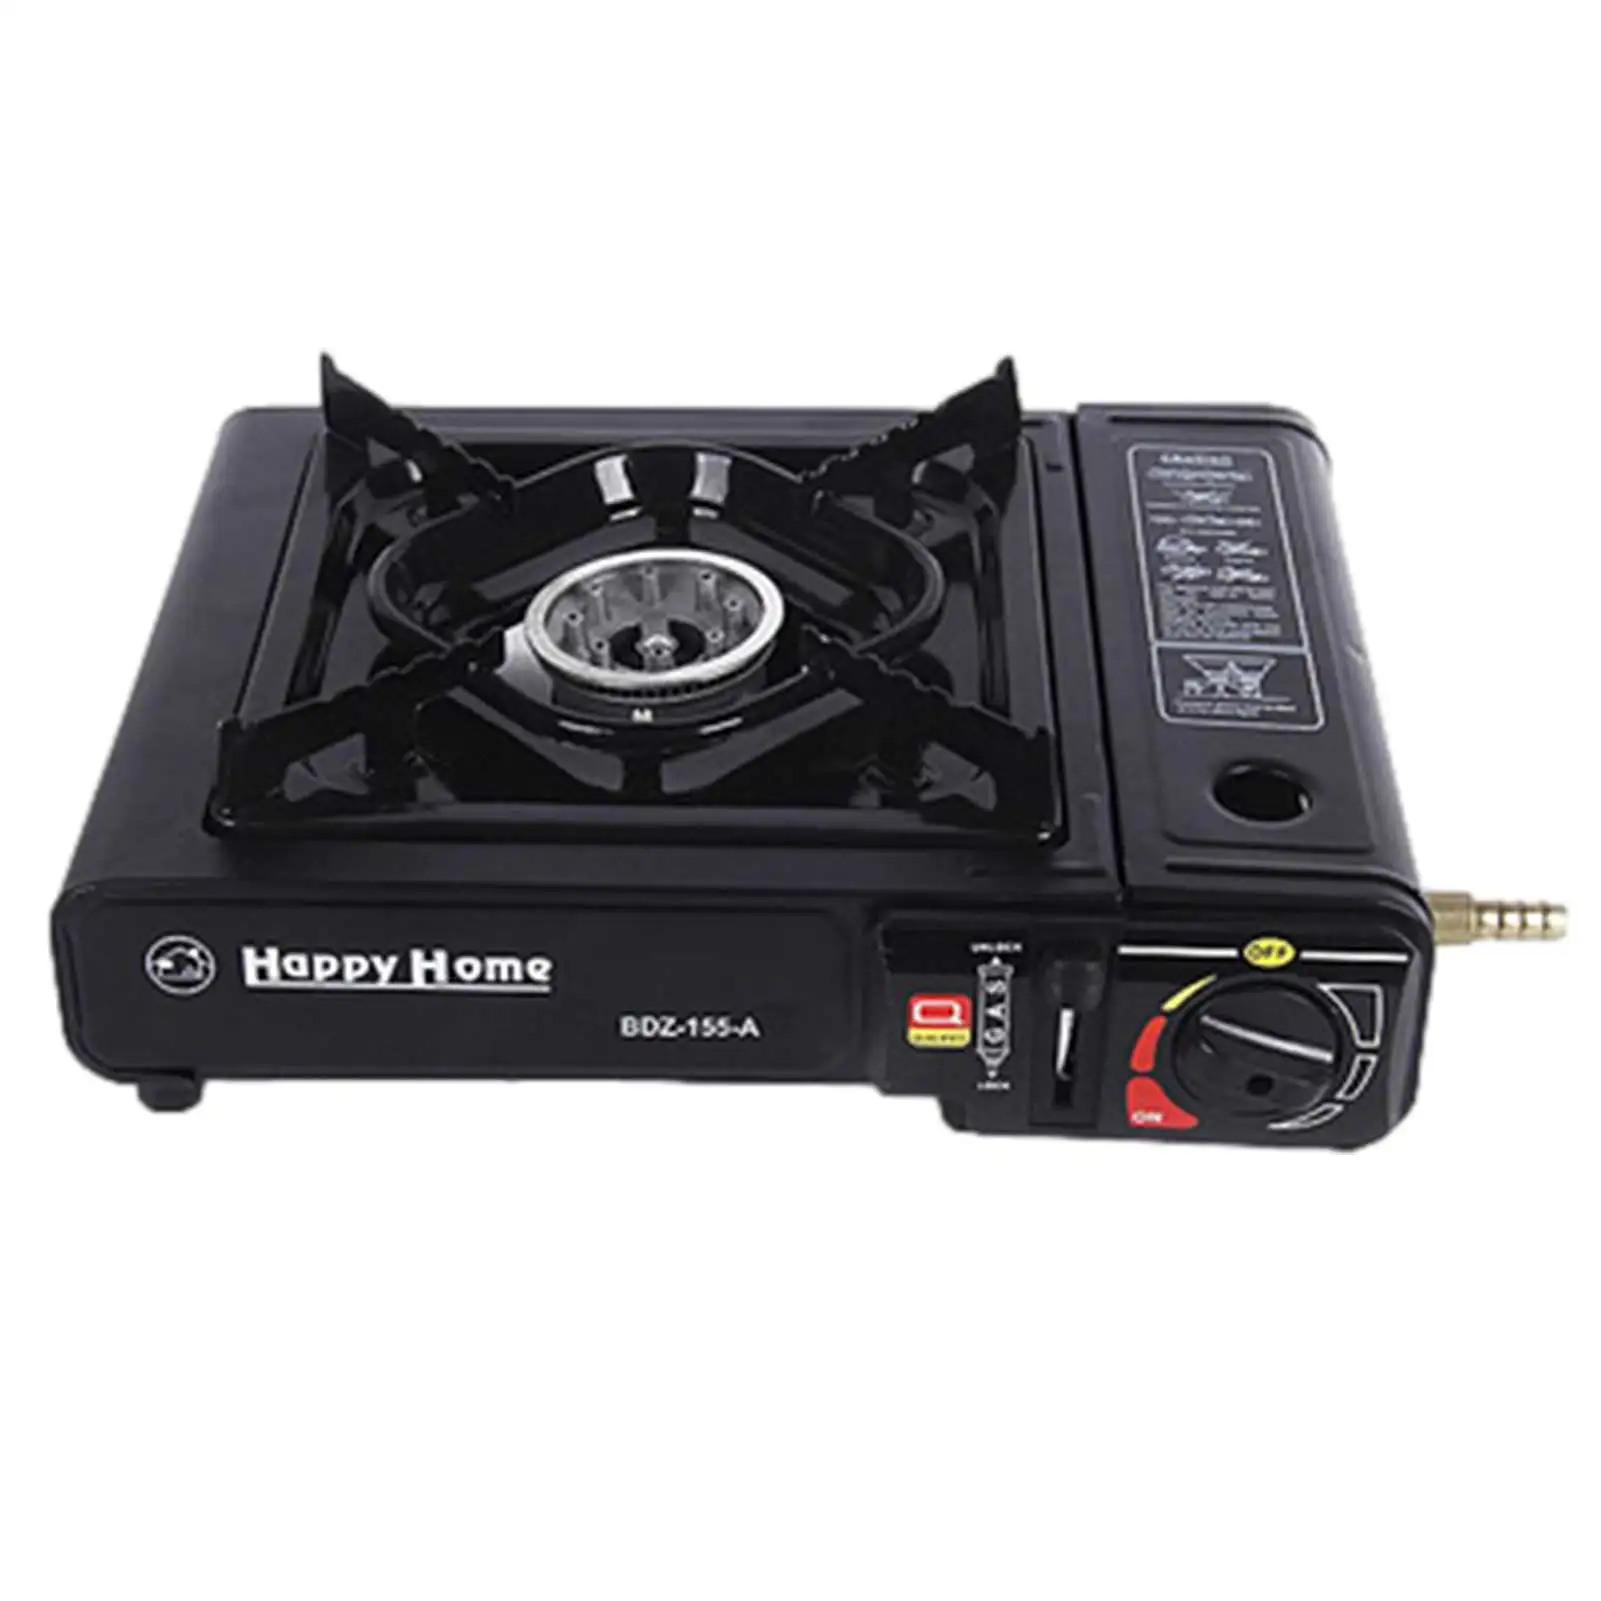 

Outdoor Camping Stove 3000W Portable Gas Cooker Portable For Butane Coal BDZ-155-A Single Burner With Liberal Camp Cookware